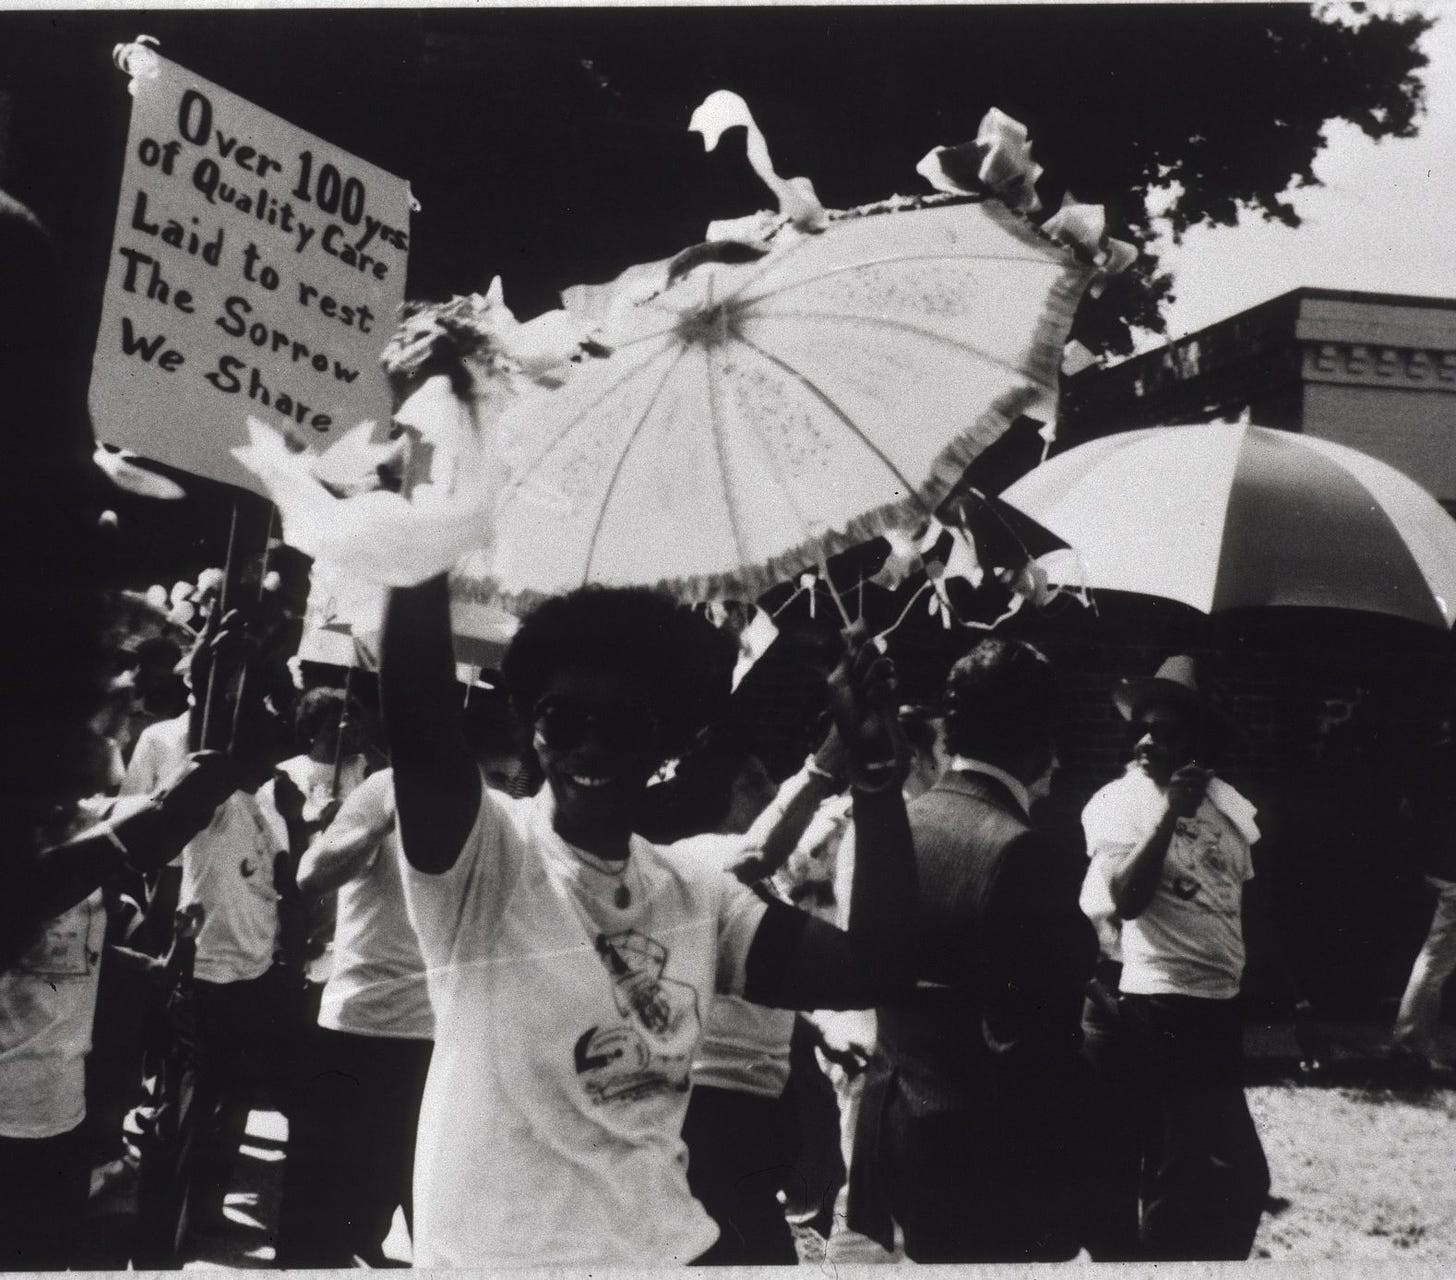 The black community of New Orleans in a black and white photo dated from the 1980's staging a jazz funeral and protest about the closing of a public hospital. Participants of the protest are in the background with umbrellas raised. One is carrying a sign that reads: "Over 100 years of Quality Care Laid to rest The Sorrow We Share".